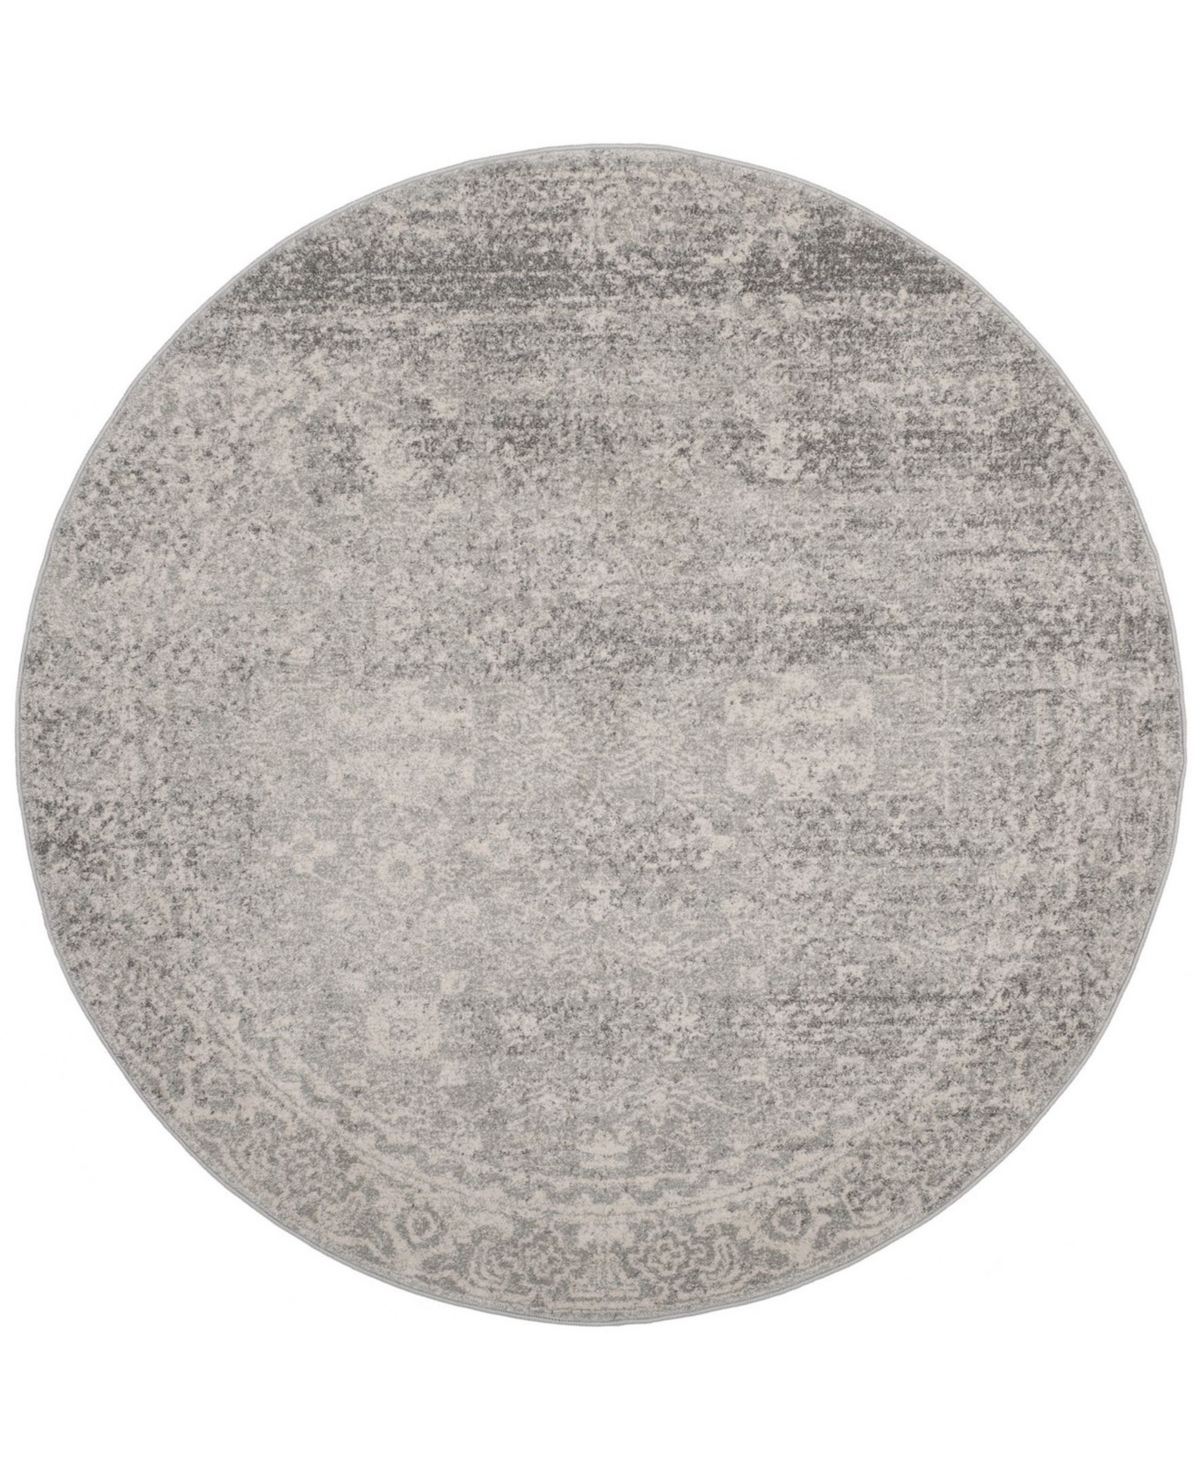 Safavieh Evoke Silver and Ivory 9' x 9' Round Area Rug - Silver